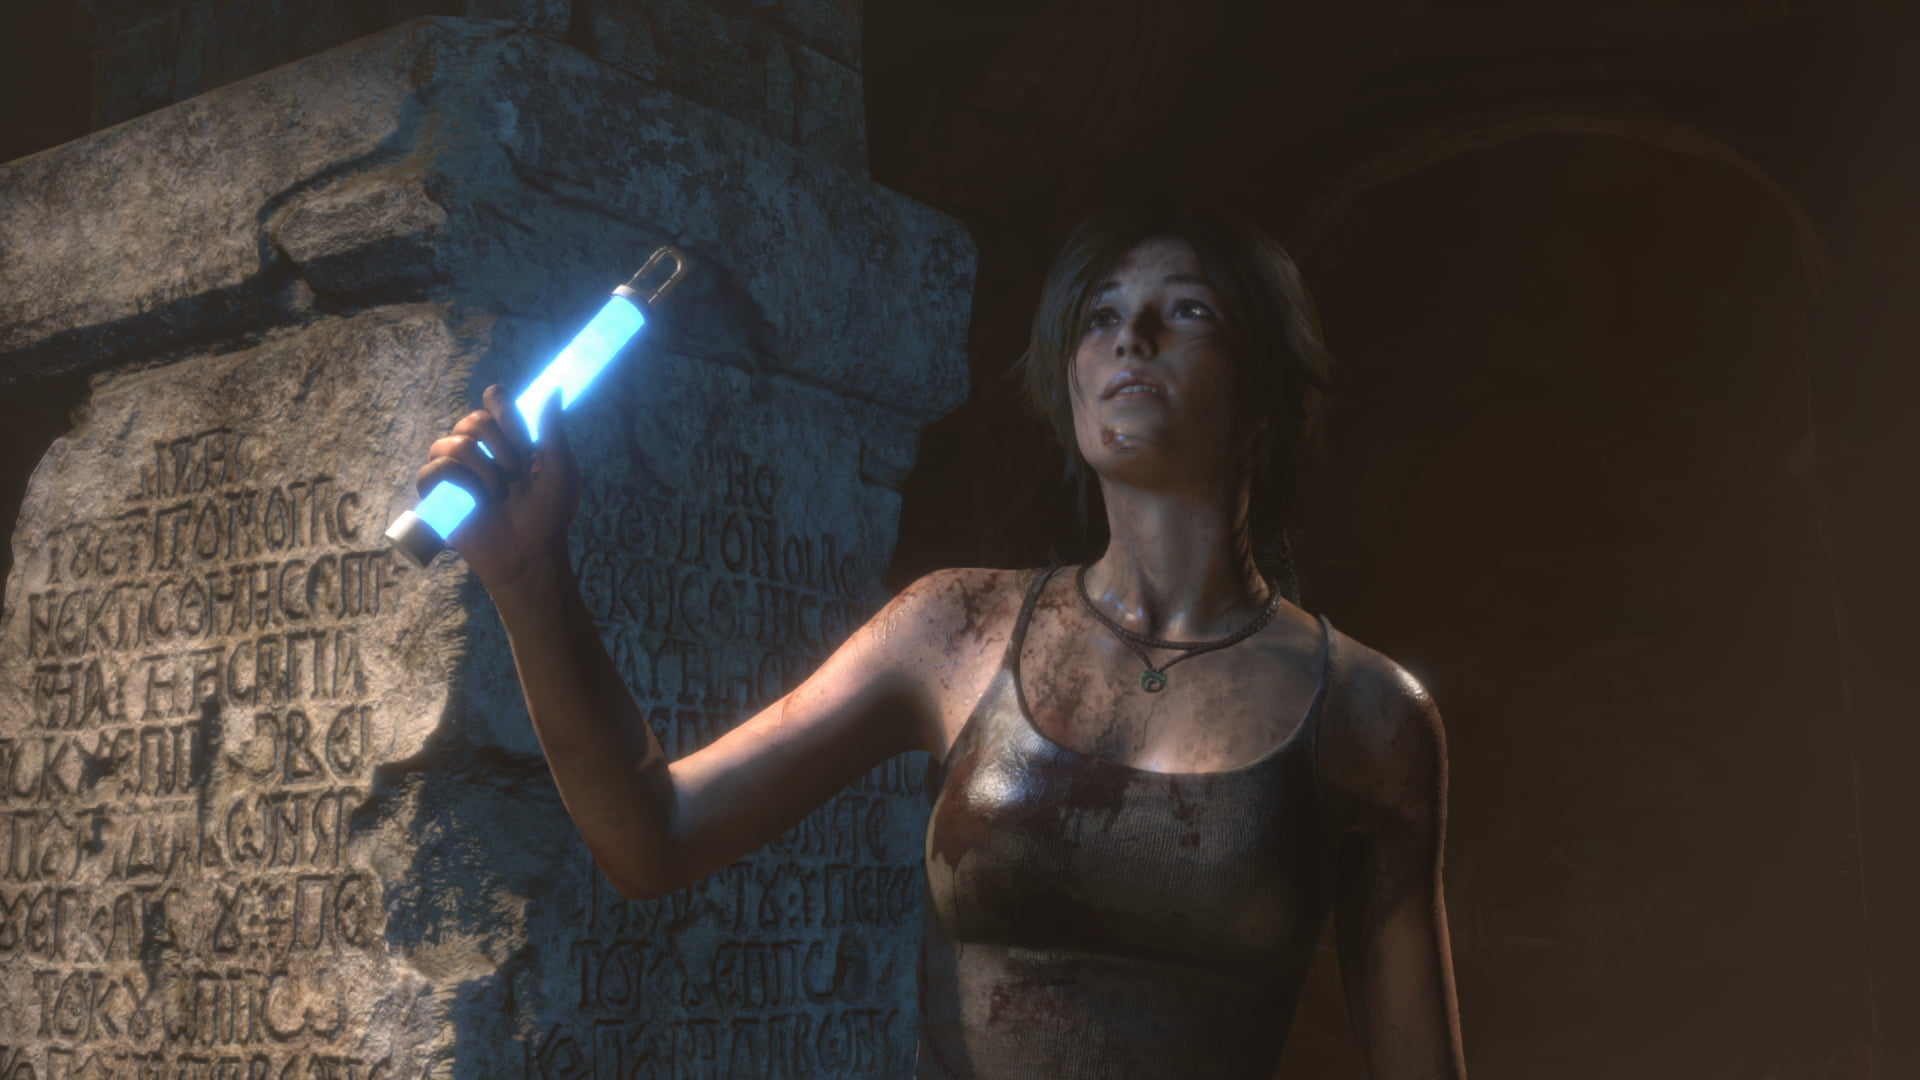 1920x1080 Tomb Raider online character graphic wallpaper, Rise of the Tomb Raider, Tomb Raider, Lara Croft HD wallpaper